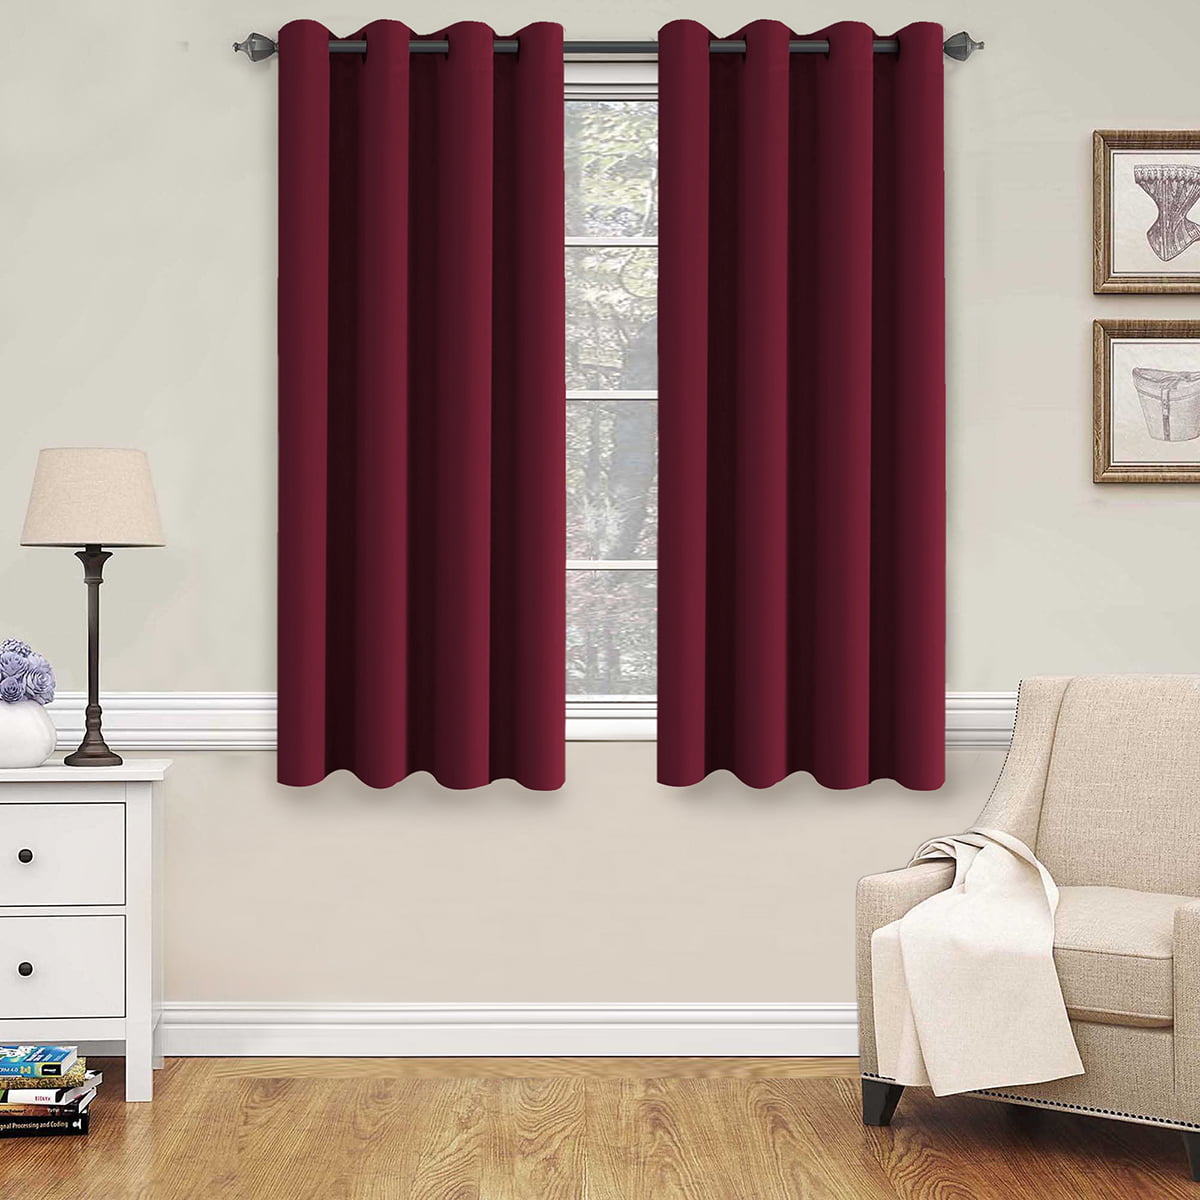 H.Versailtex Blackout Thermal Insulated Curtains For Bedroom /Living